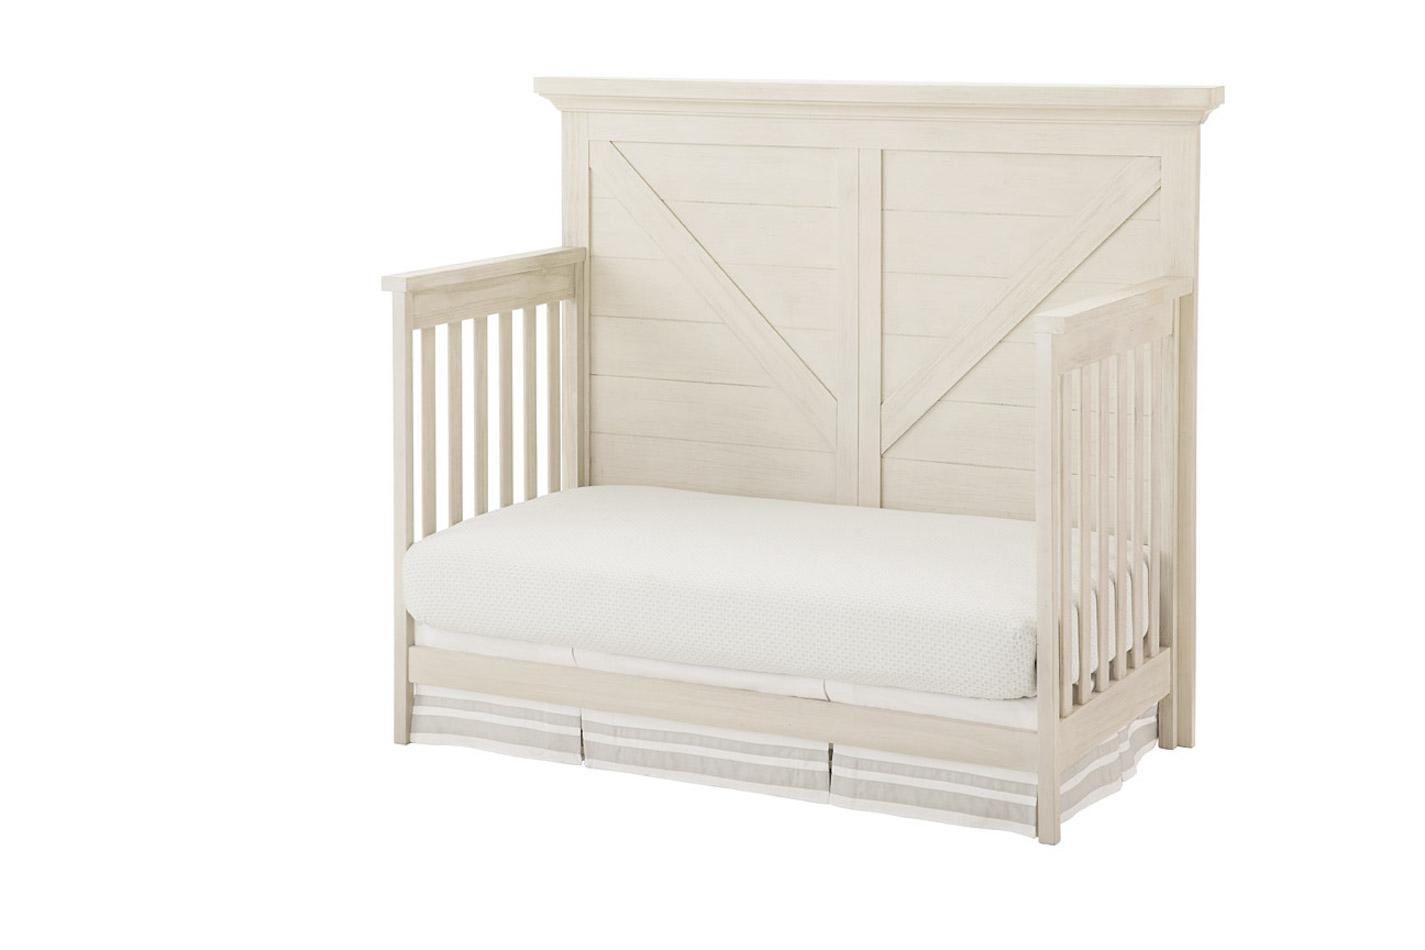 Westwood Design Westfield Convertible Crib - Brushed White